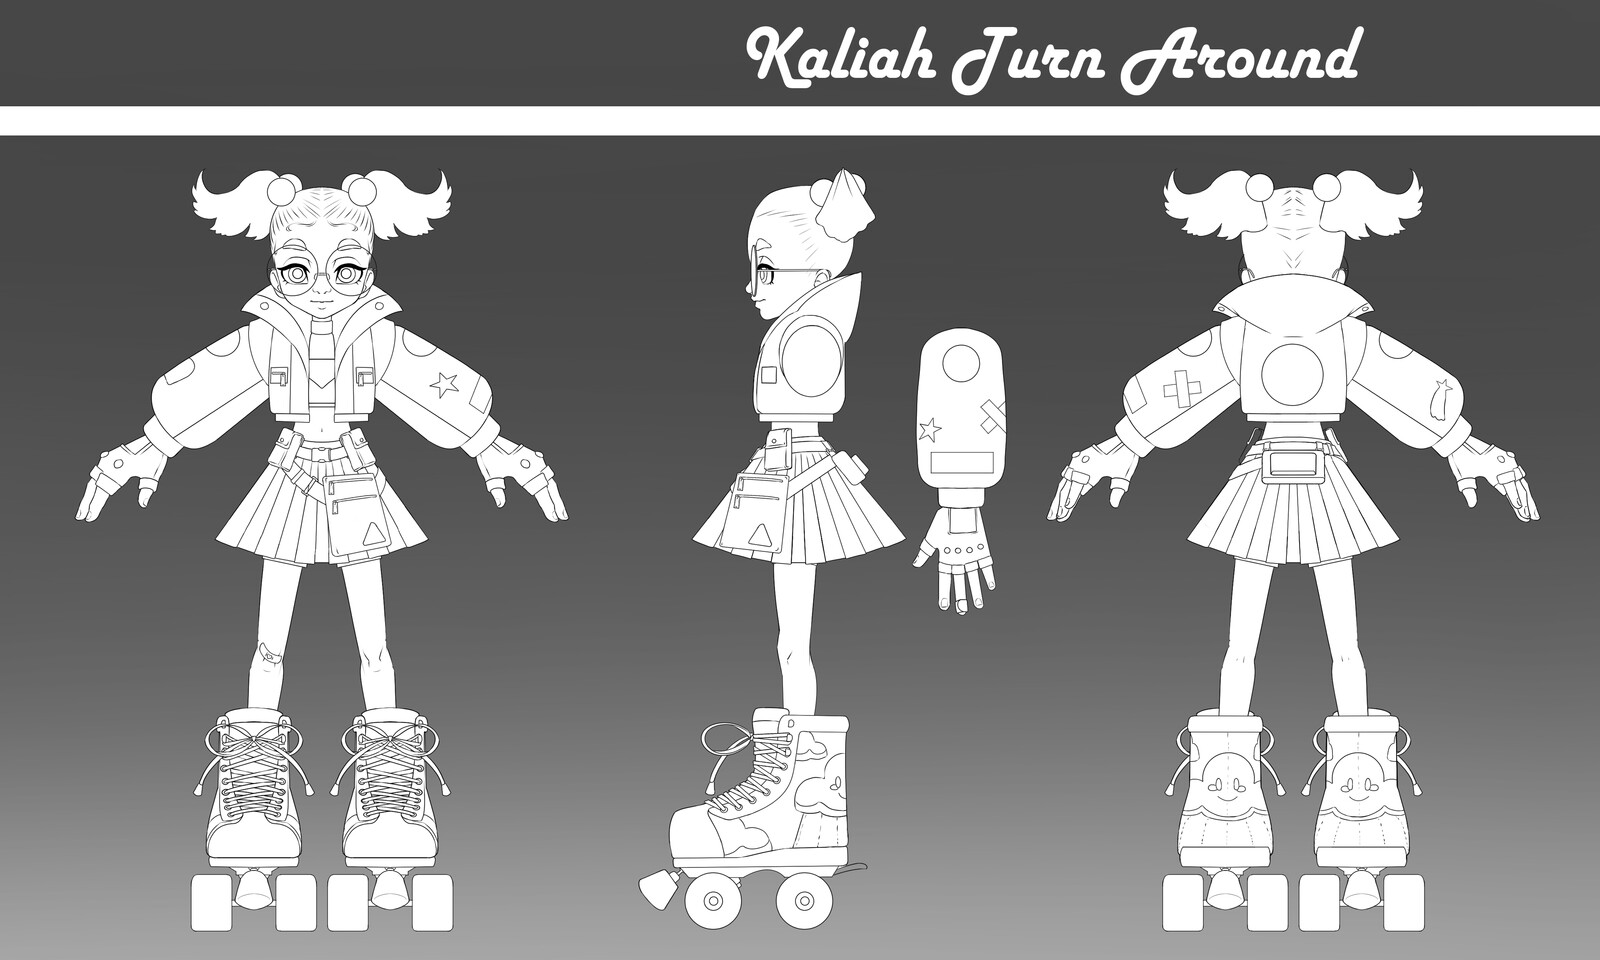 The character artist will use this to model Kaliah.